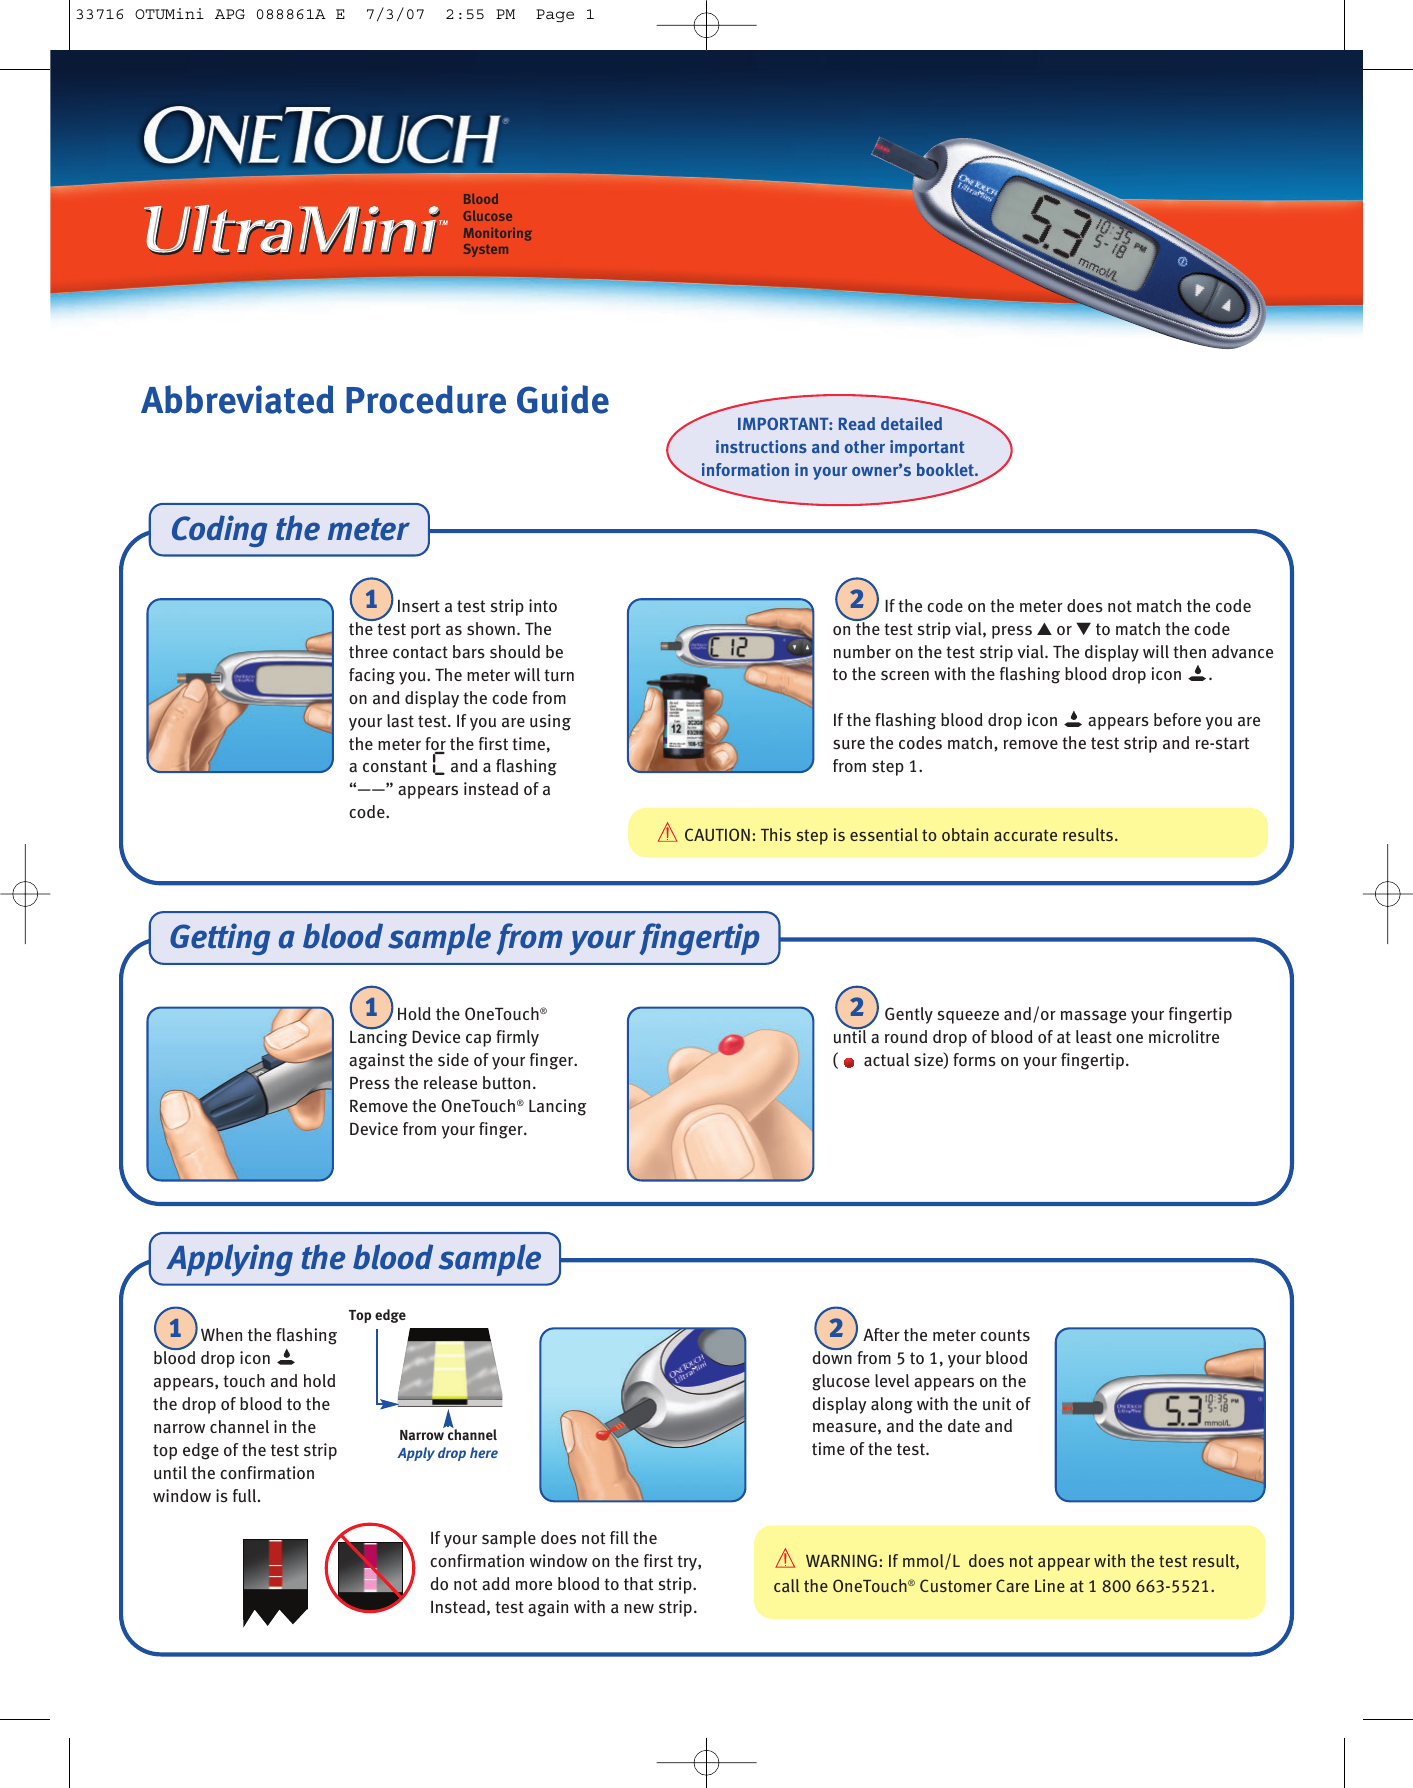 Page 1 of 2 - Lifescan Lifescan-Onetouch-Ultramini-Blood-Glucose-ling-System-Users-Manual- 33716 OTUMini APG 088861A E  Lifescan-onetouch-ultramini-blood-glucose-ling-system-users-manual